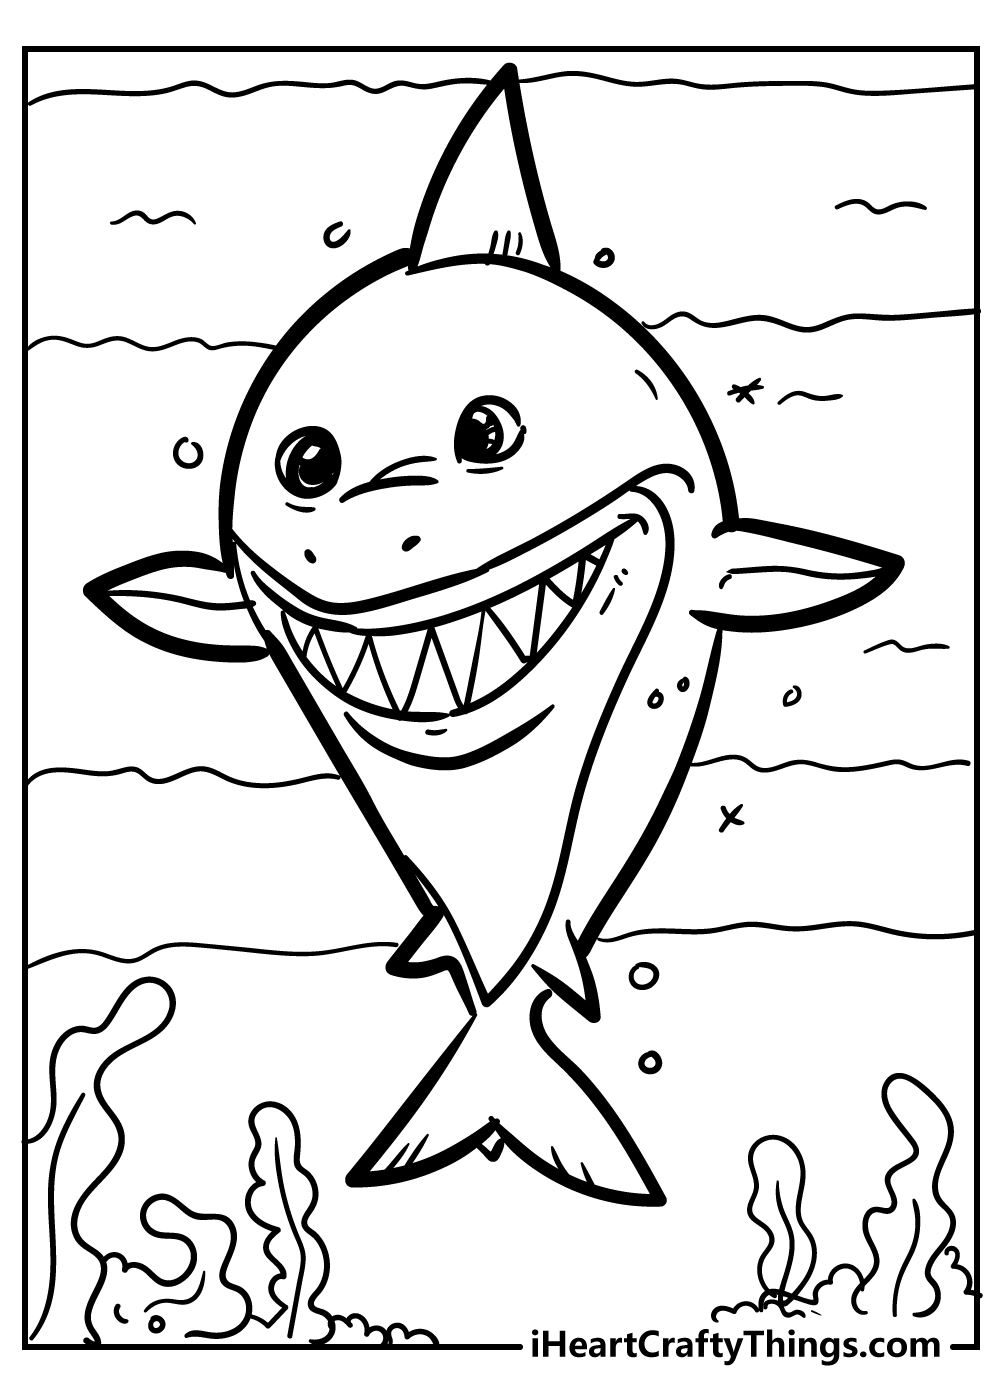 Shark coloring pages free pdf download